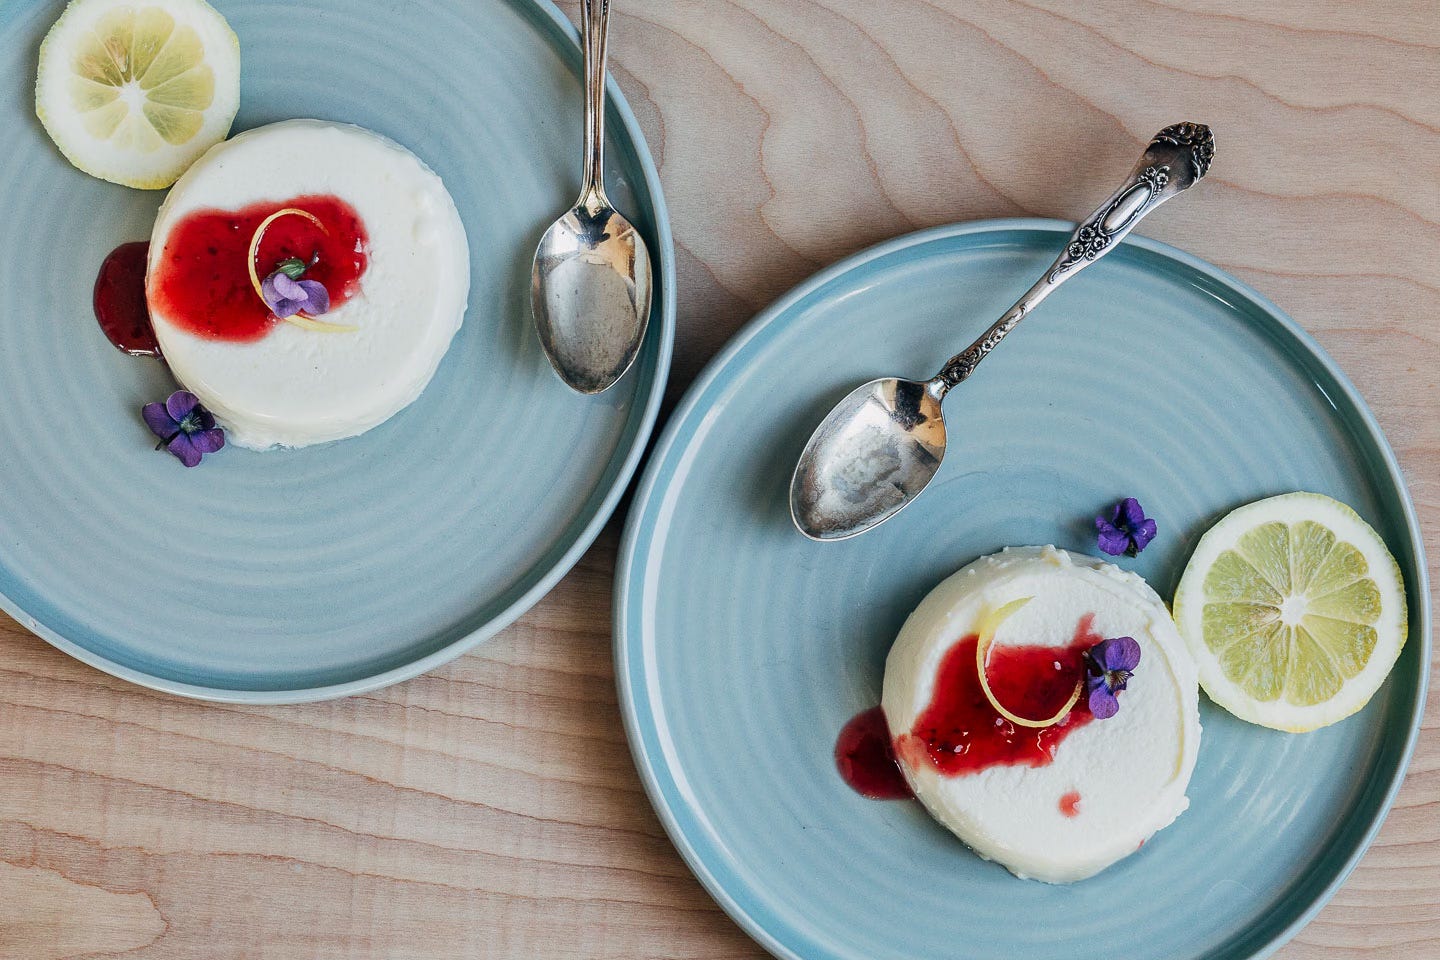 Two servings of panna cotta on plates